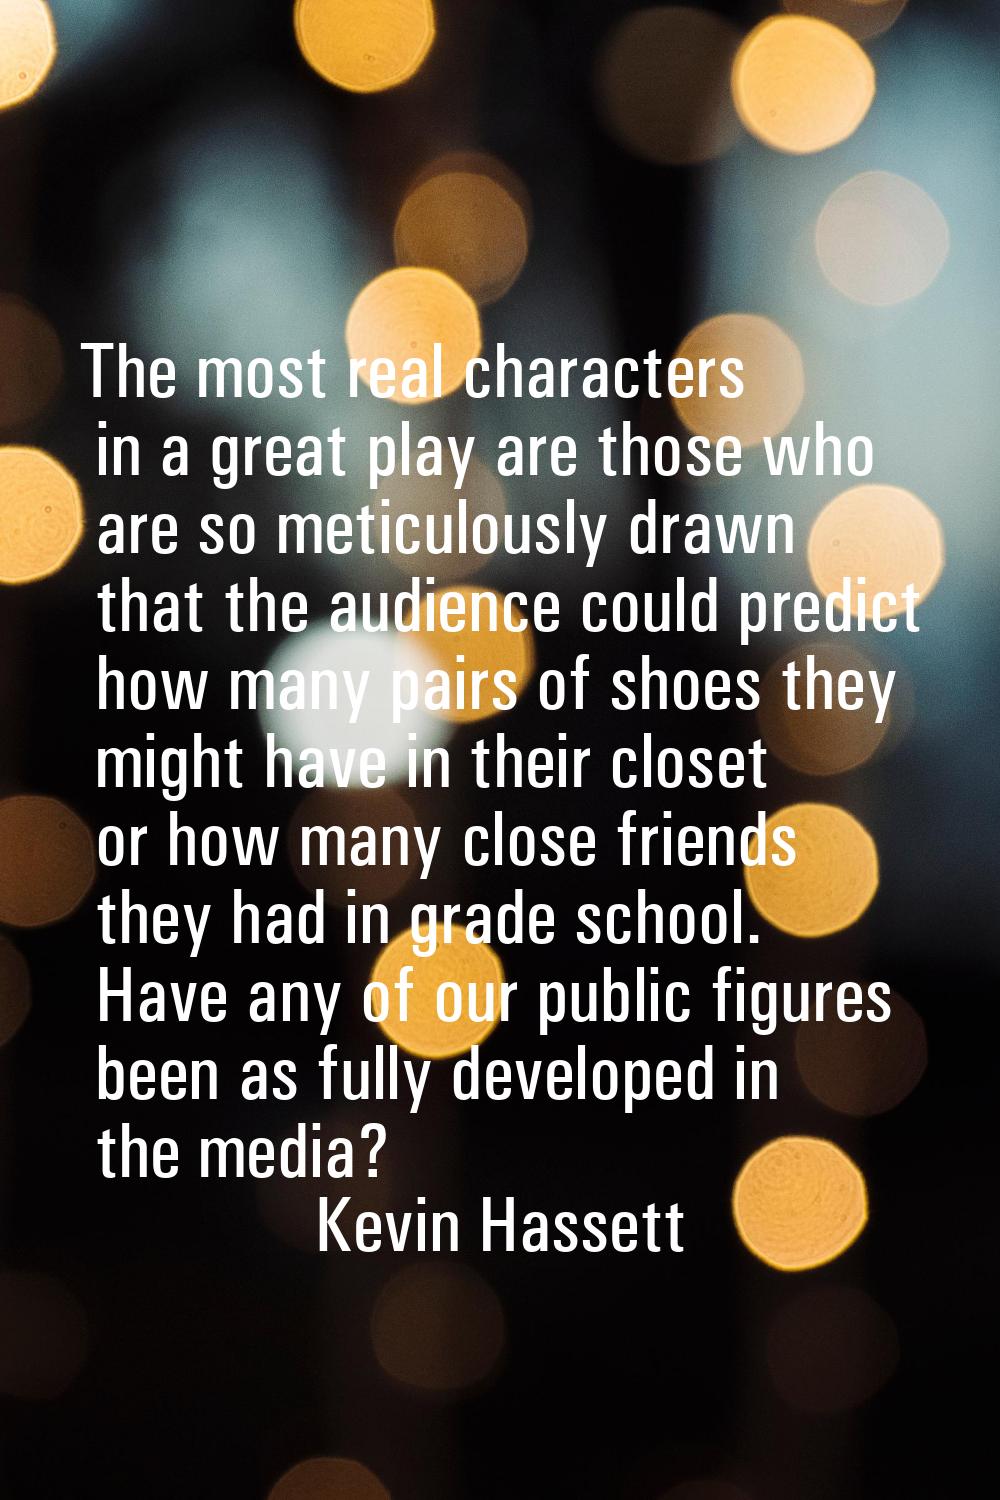 The most real characters in a great play are those who are so meticulously drawn that the audience 